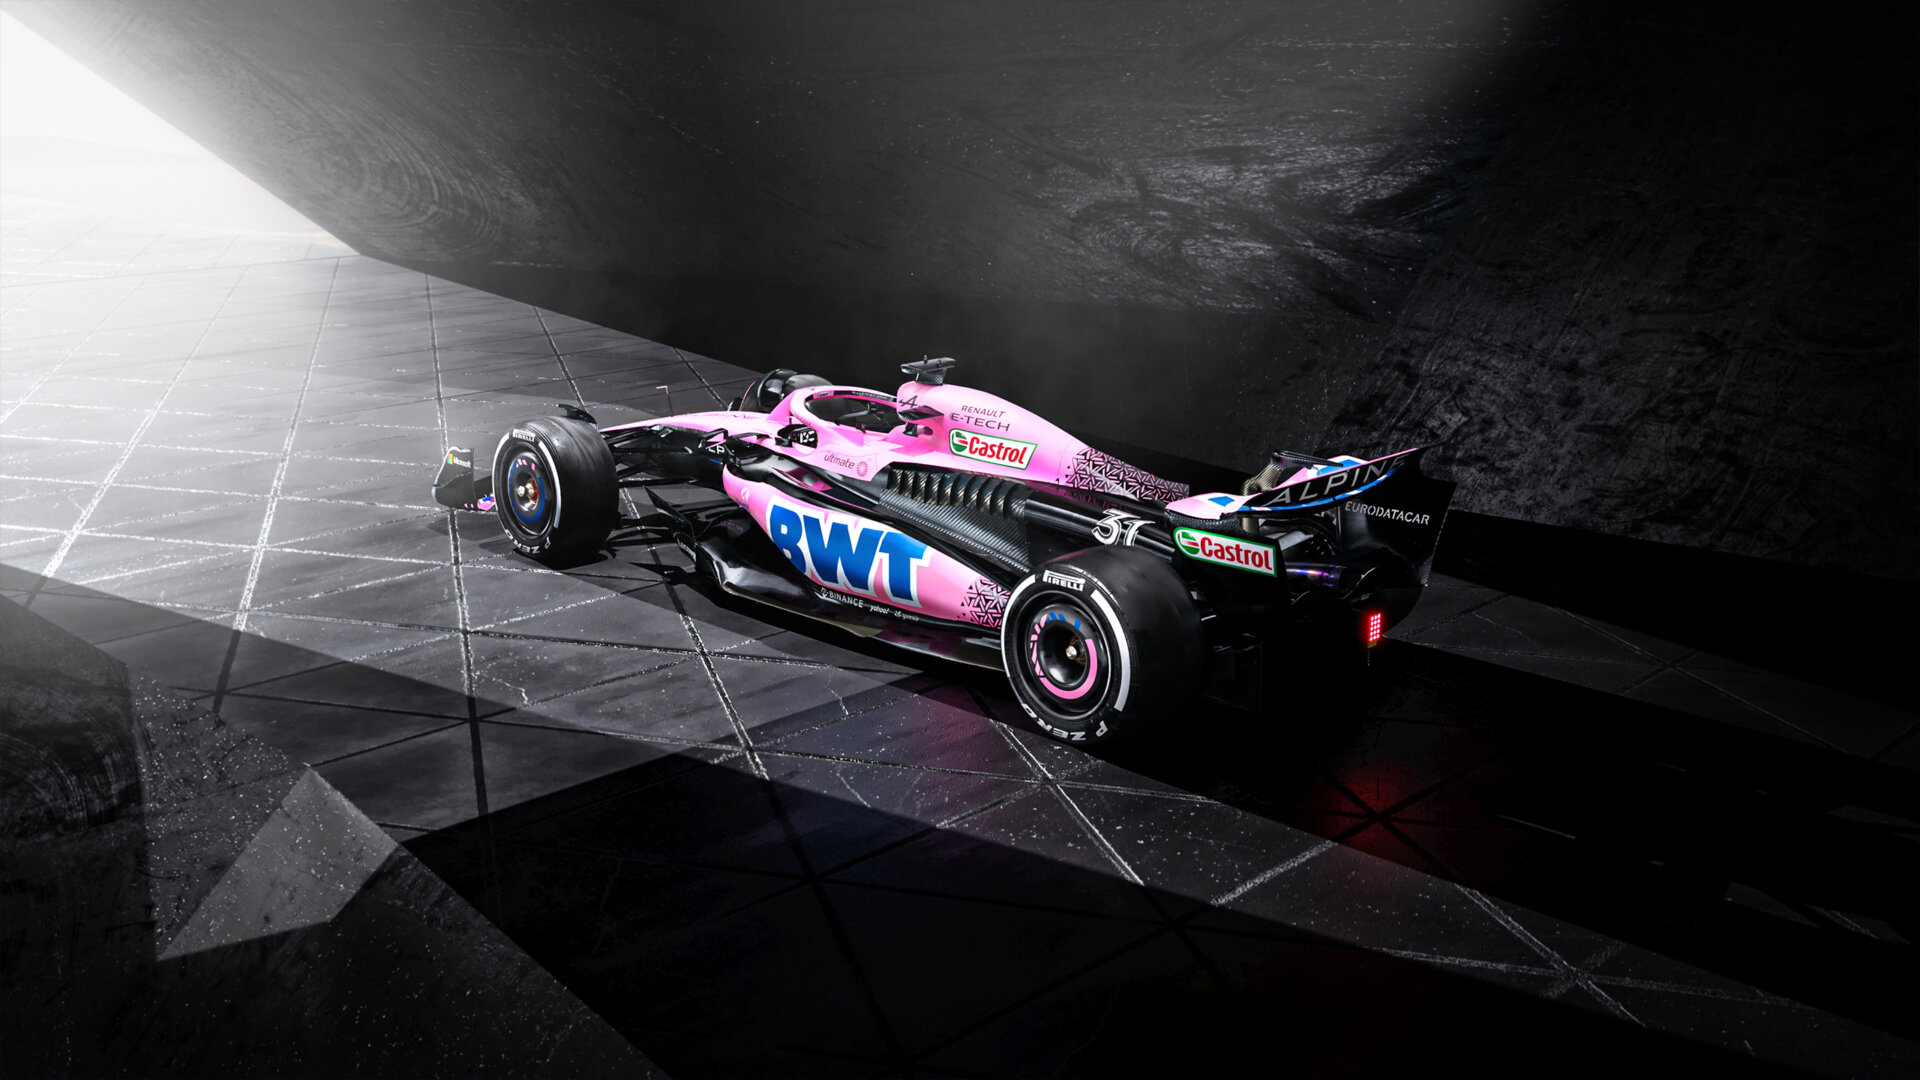 BWT Alpine – pink is back on track again! - BWT